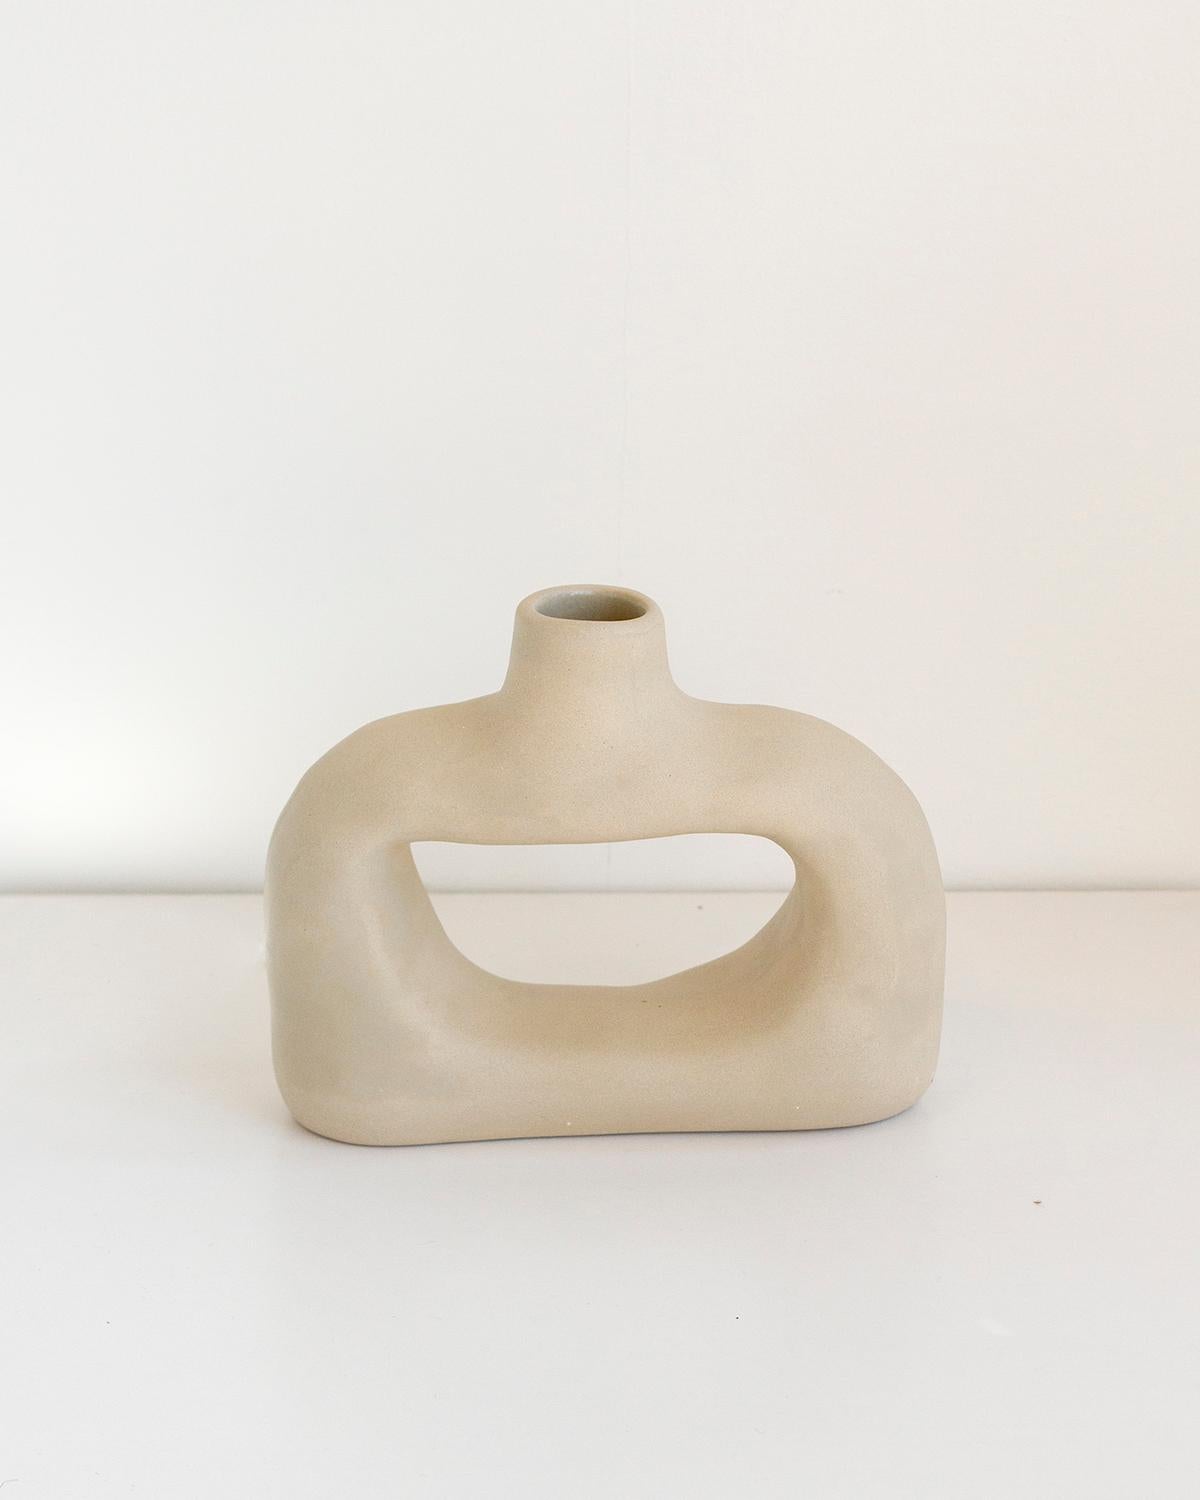 Nook Handmade Organic Modern Clay Vase in Cream In New Condition For Sale In West Hollywood, CA